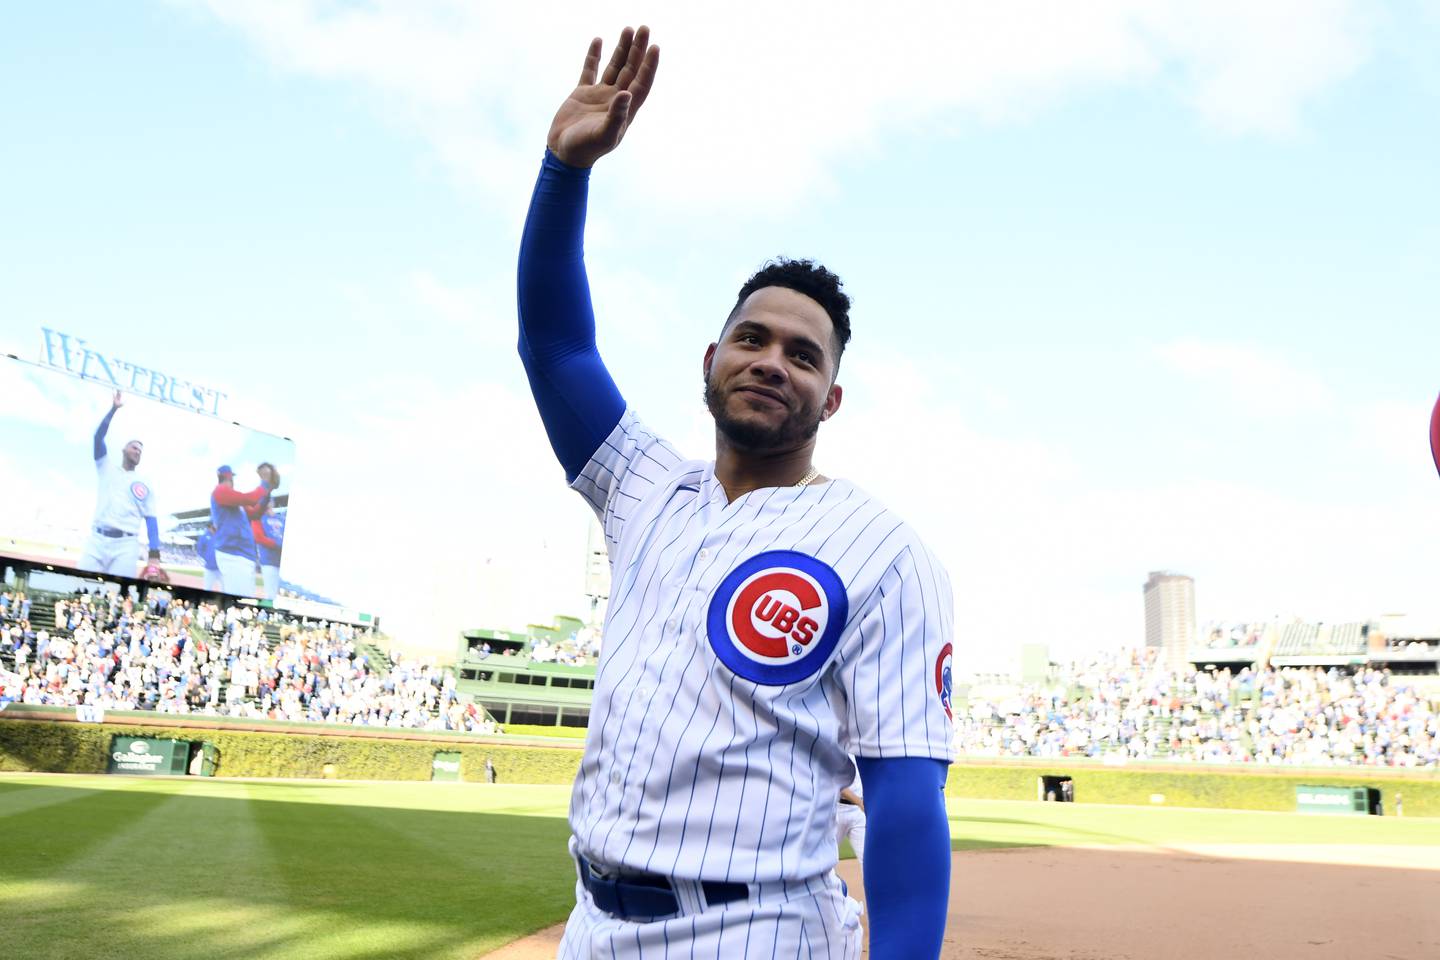 The Cubs' Willson Contreras waves to the fans after a game against the Reds on Sunday, Oct. 2, 2022, at Wrigley Field.